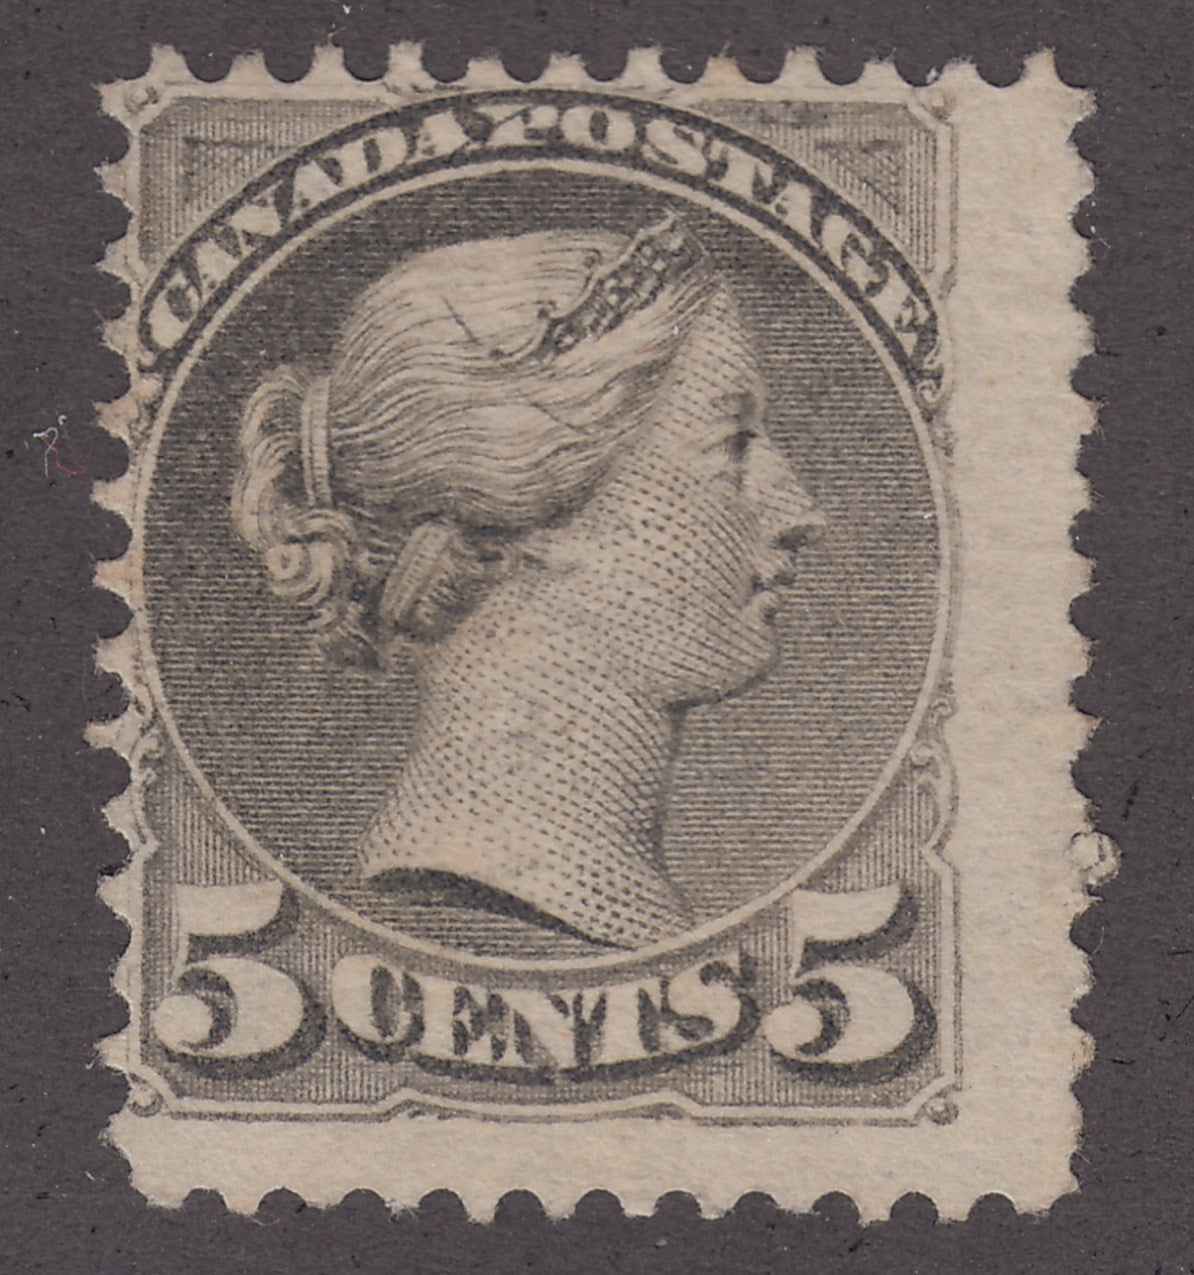 0042CA1710 - Canada #42 - Mint - UNLISTED Constant Variety?